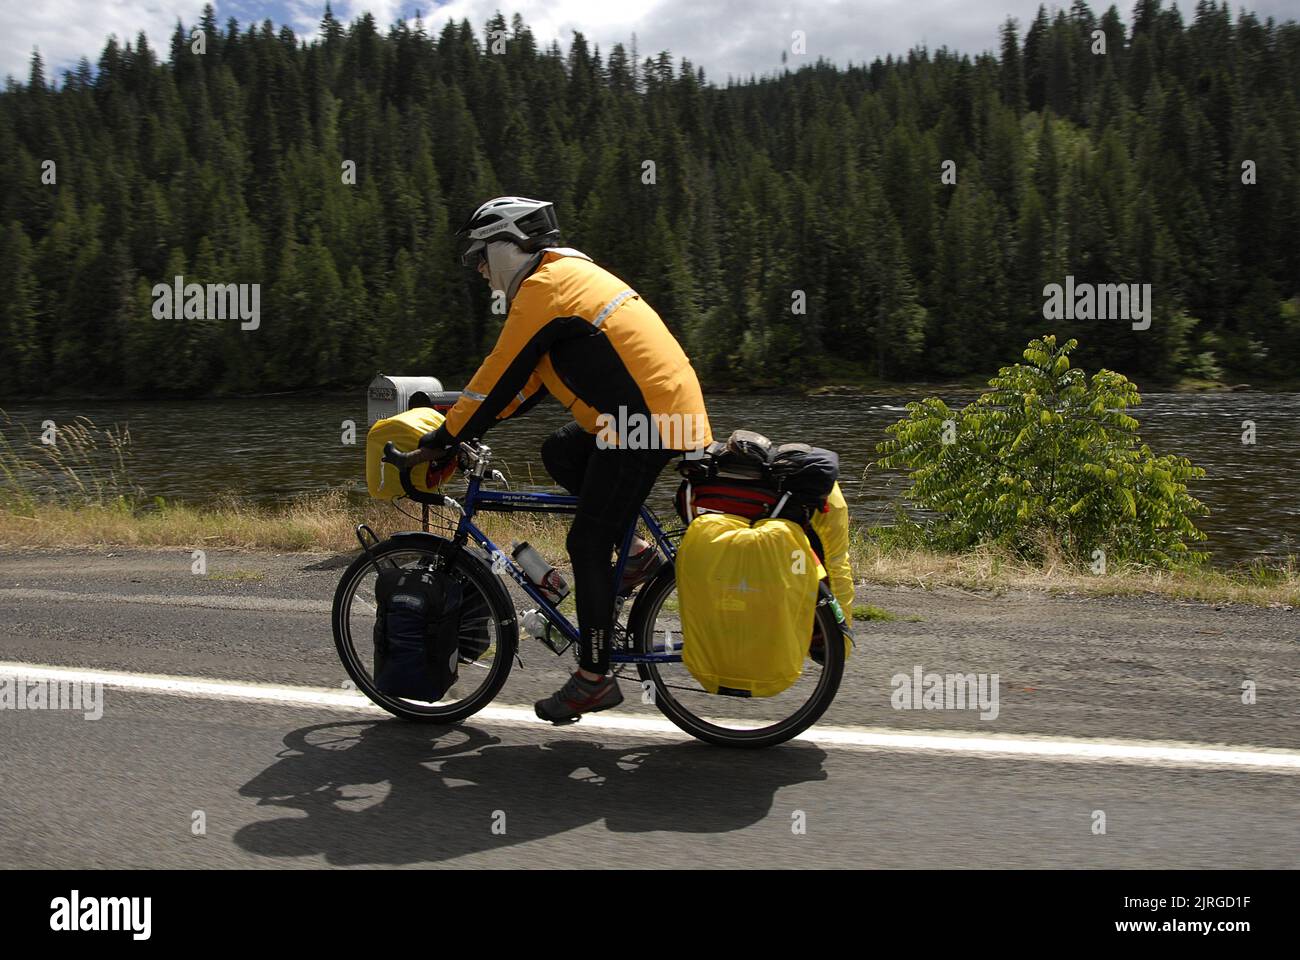 Highway 12 /Idaho /USA- 18. Juni 2016/ American Biker ridere bike along side the Lochsa River in Idado and High way 12 from idaho to Momtan United States of Amrica( Foto. Francis Joseph Dean/Dean Pictures) Stockfoto